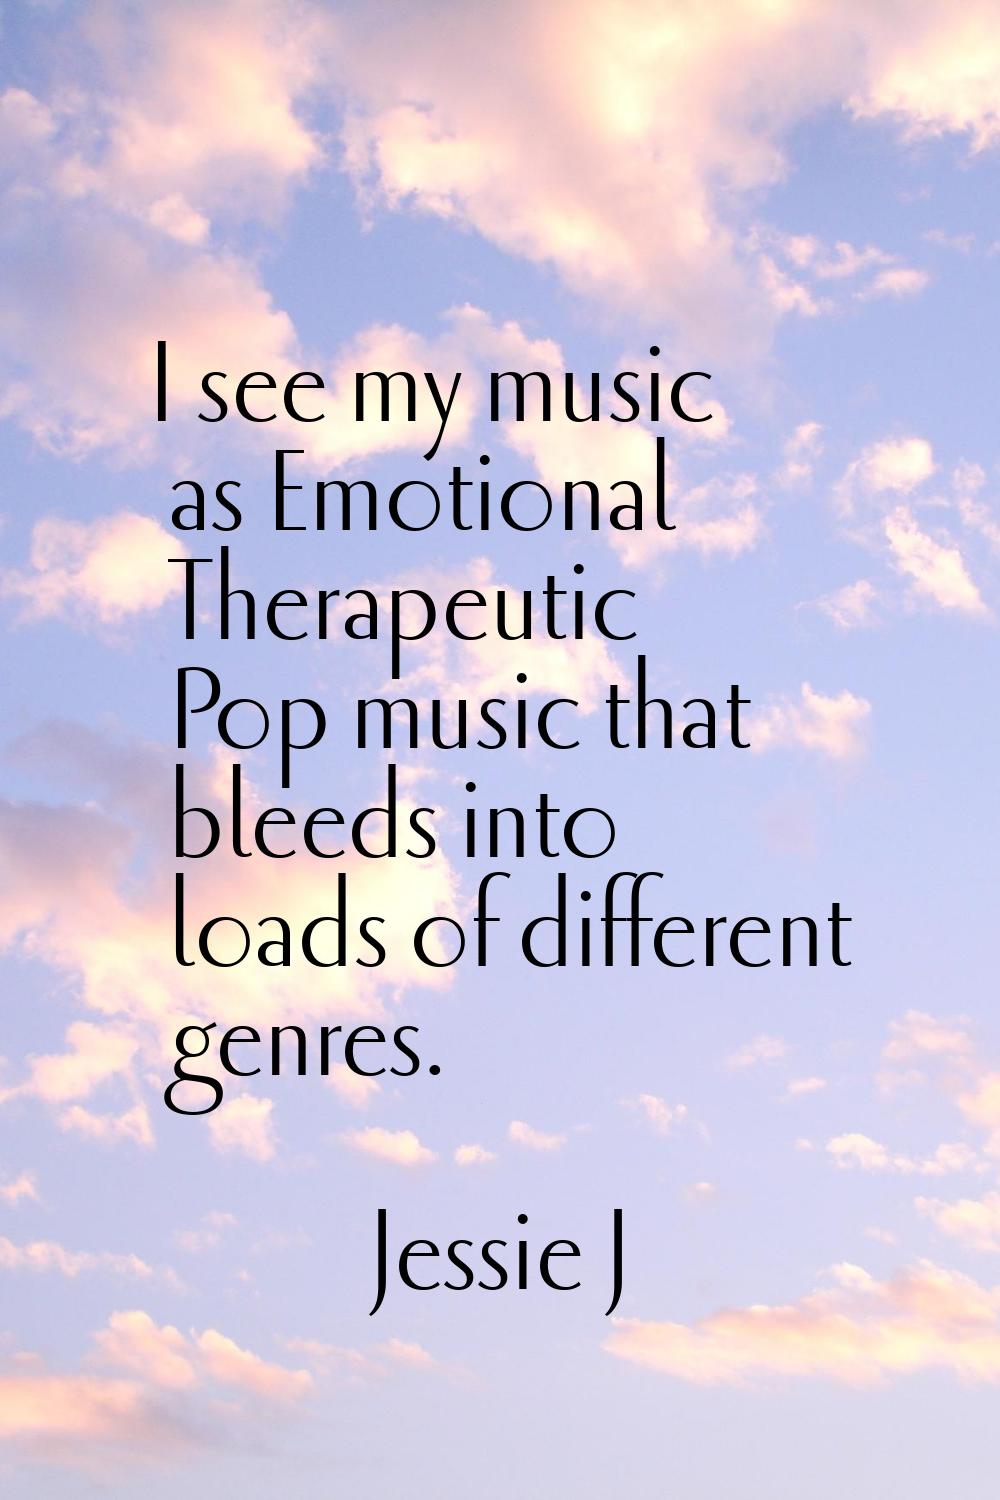 I see my music as Emotional Therapeutic Pop music that bleeds into loads of different genres.